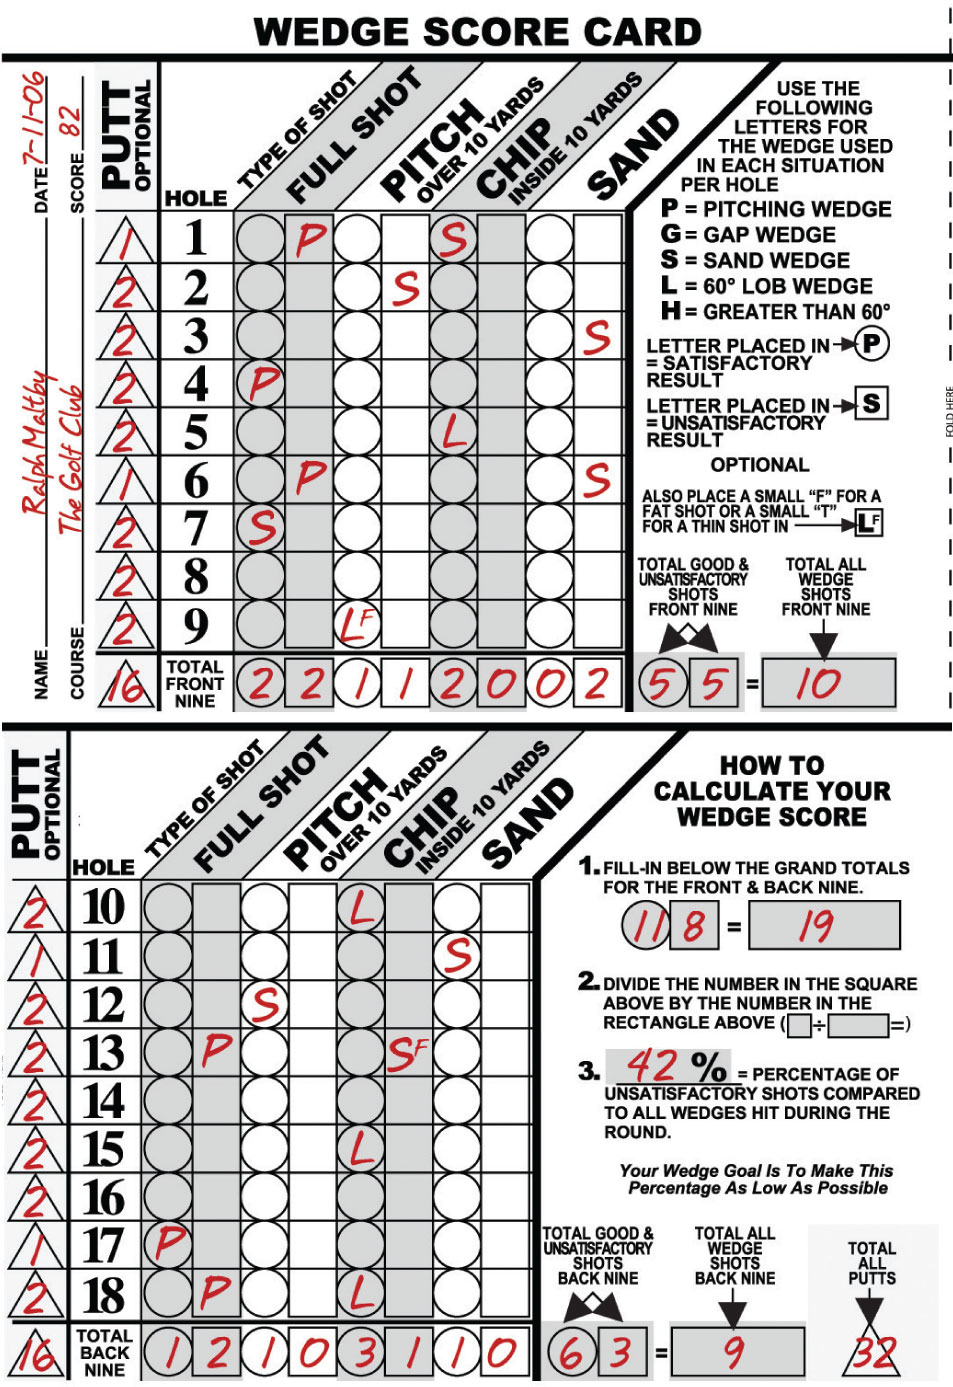 Wedge Score Card Example